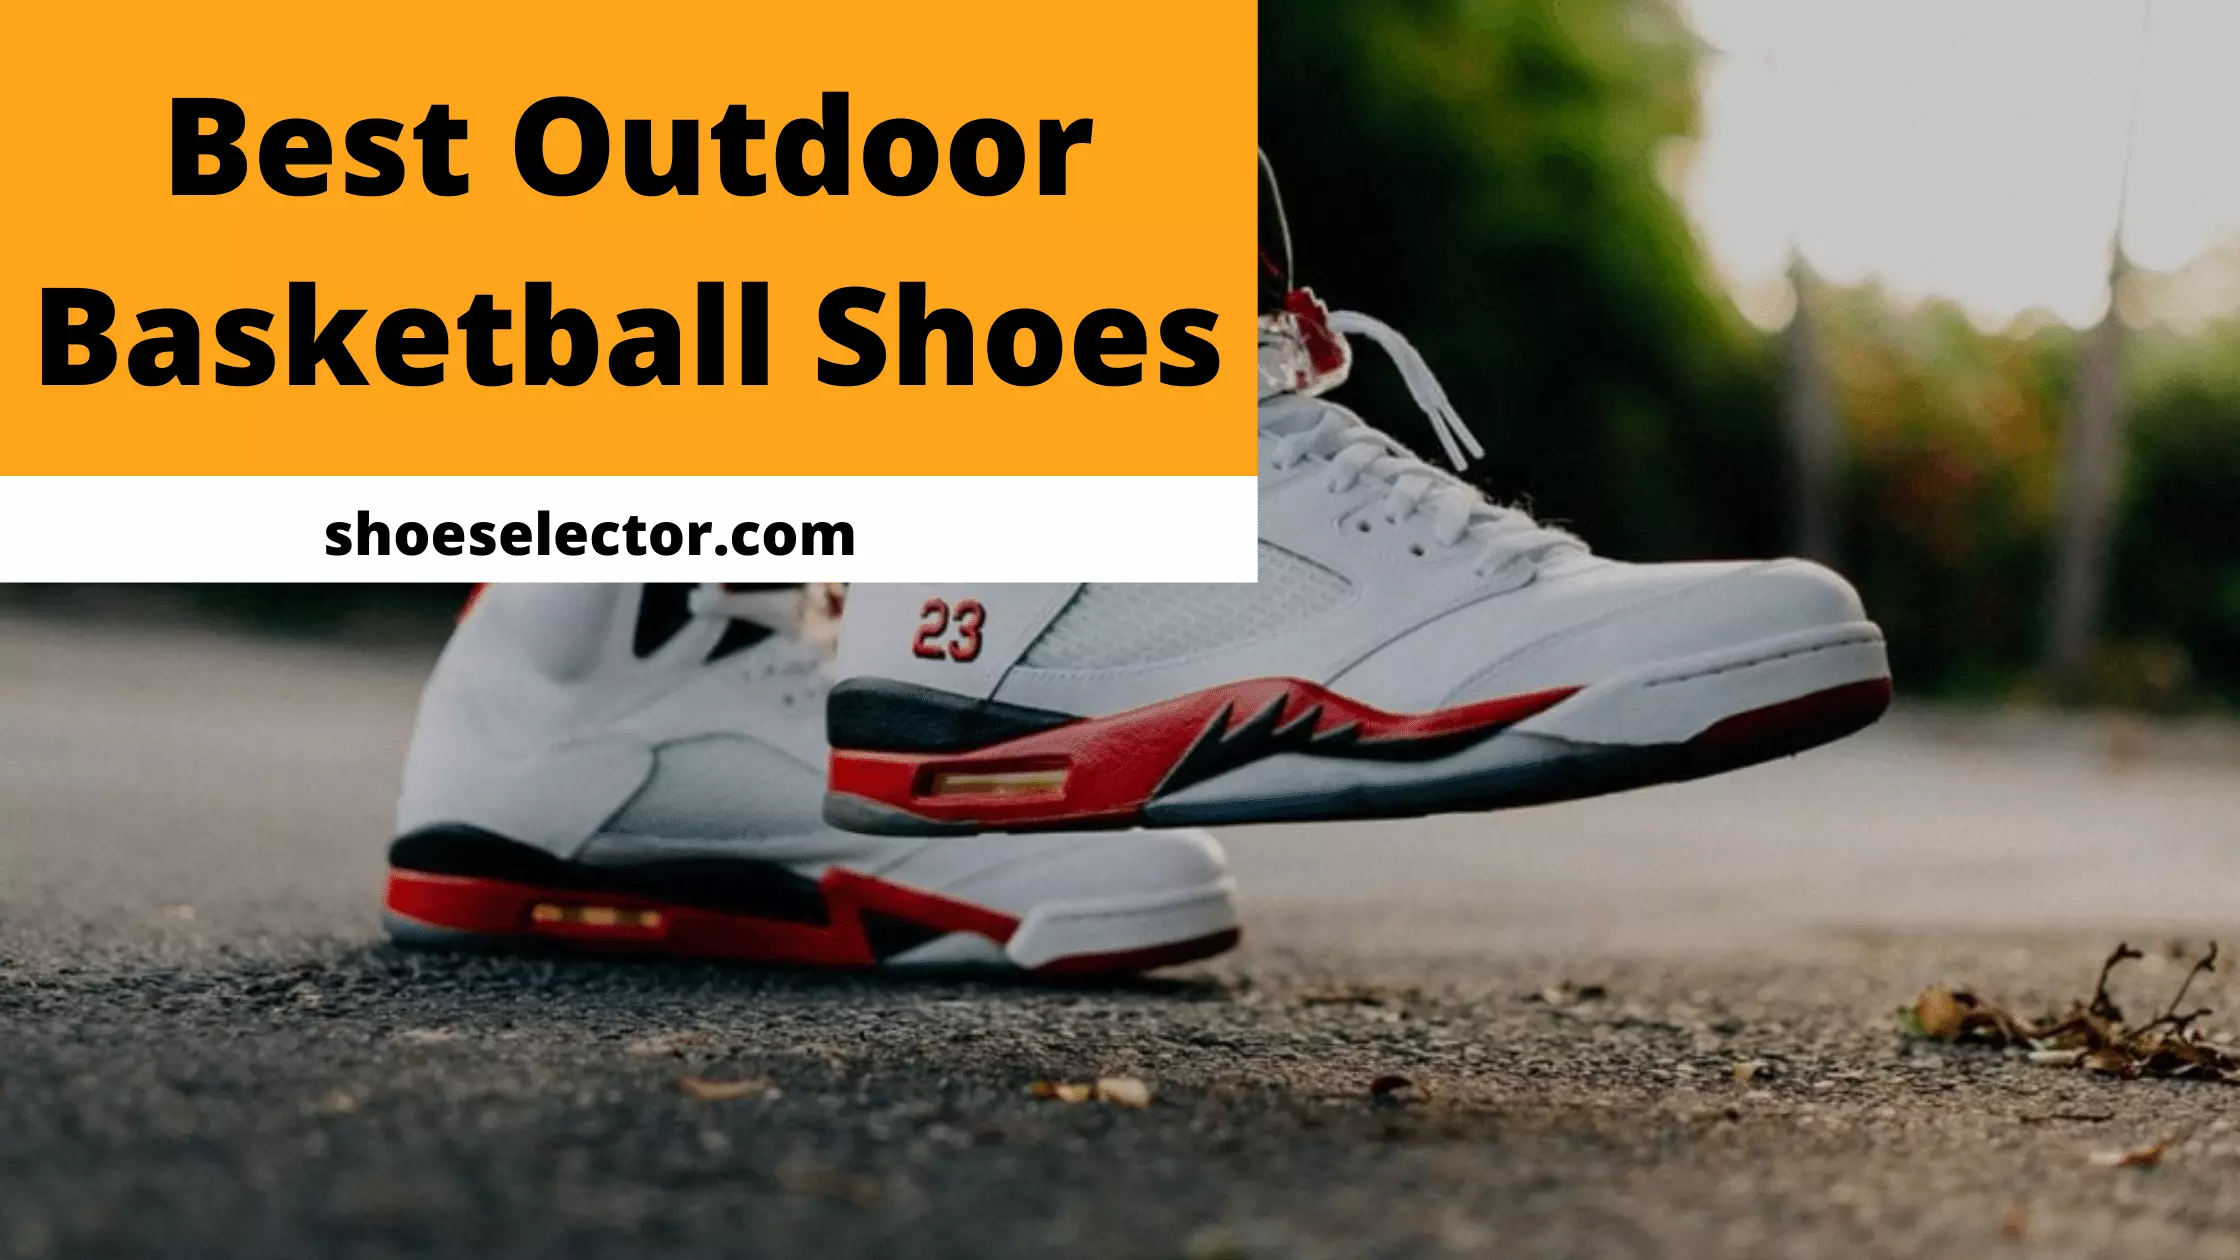 Best Outdoor Basketball Shoes With Products Comparison